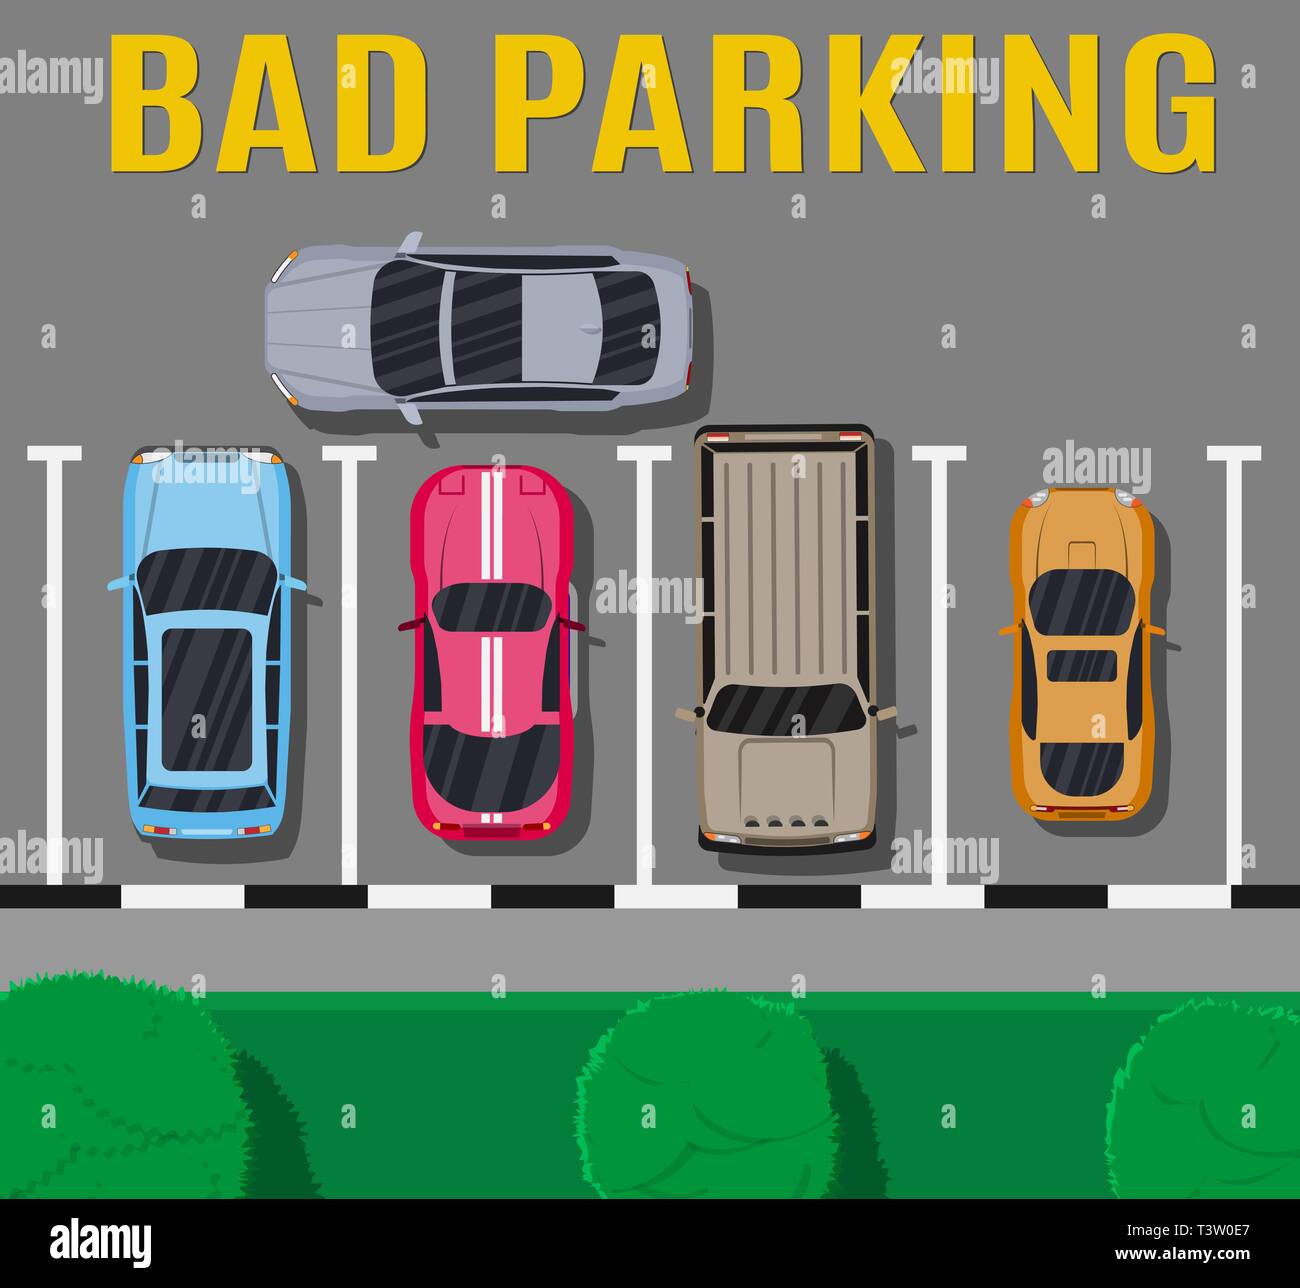 City parking lot with different cars. Shortage parking spaces. Parking zone top view with vehicles. Bad or wrong car parking. Traffic regulations. Rul Stock Vector